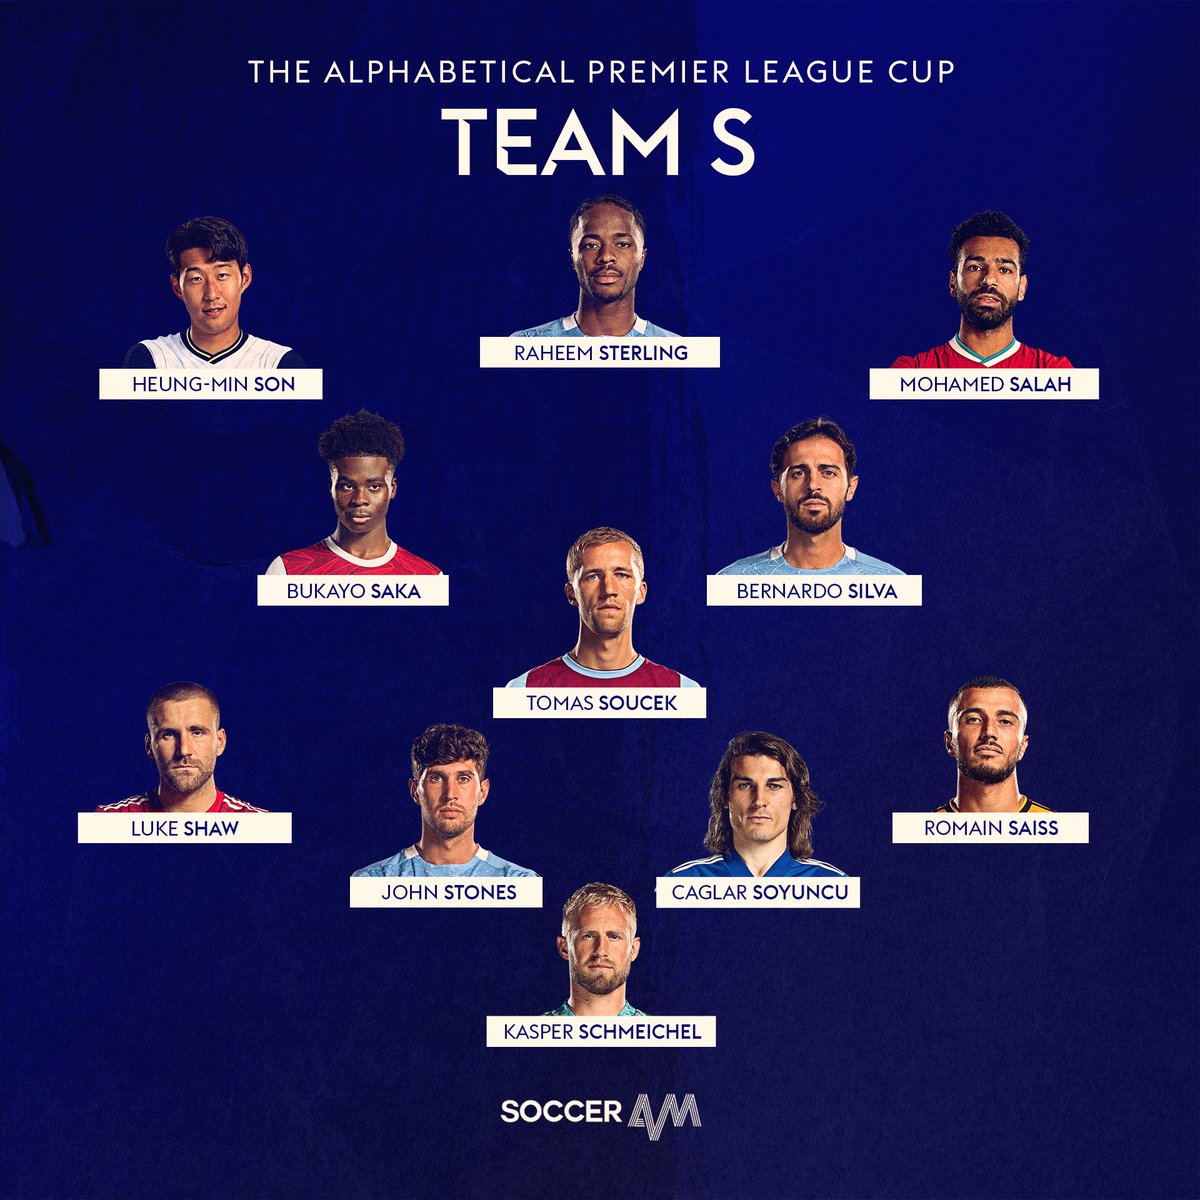 Team S The tournament favourites.You will struggle to find more world-class talent in one team, this side can beat anyone on their day.However, teams will target Saiss playing out-of-position at right-back. Star man: Mohamed Salah Captain: Kasper Schmeichel